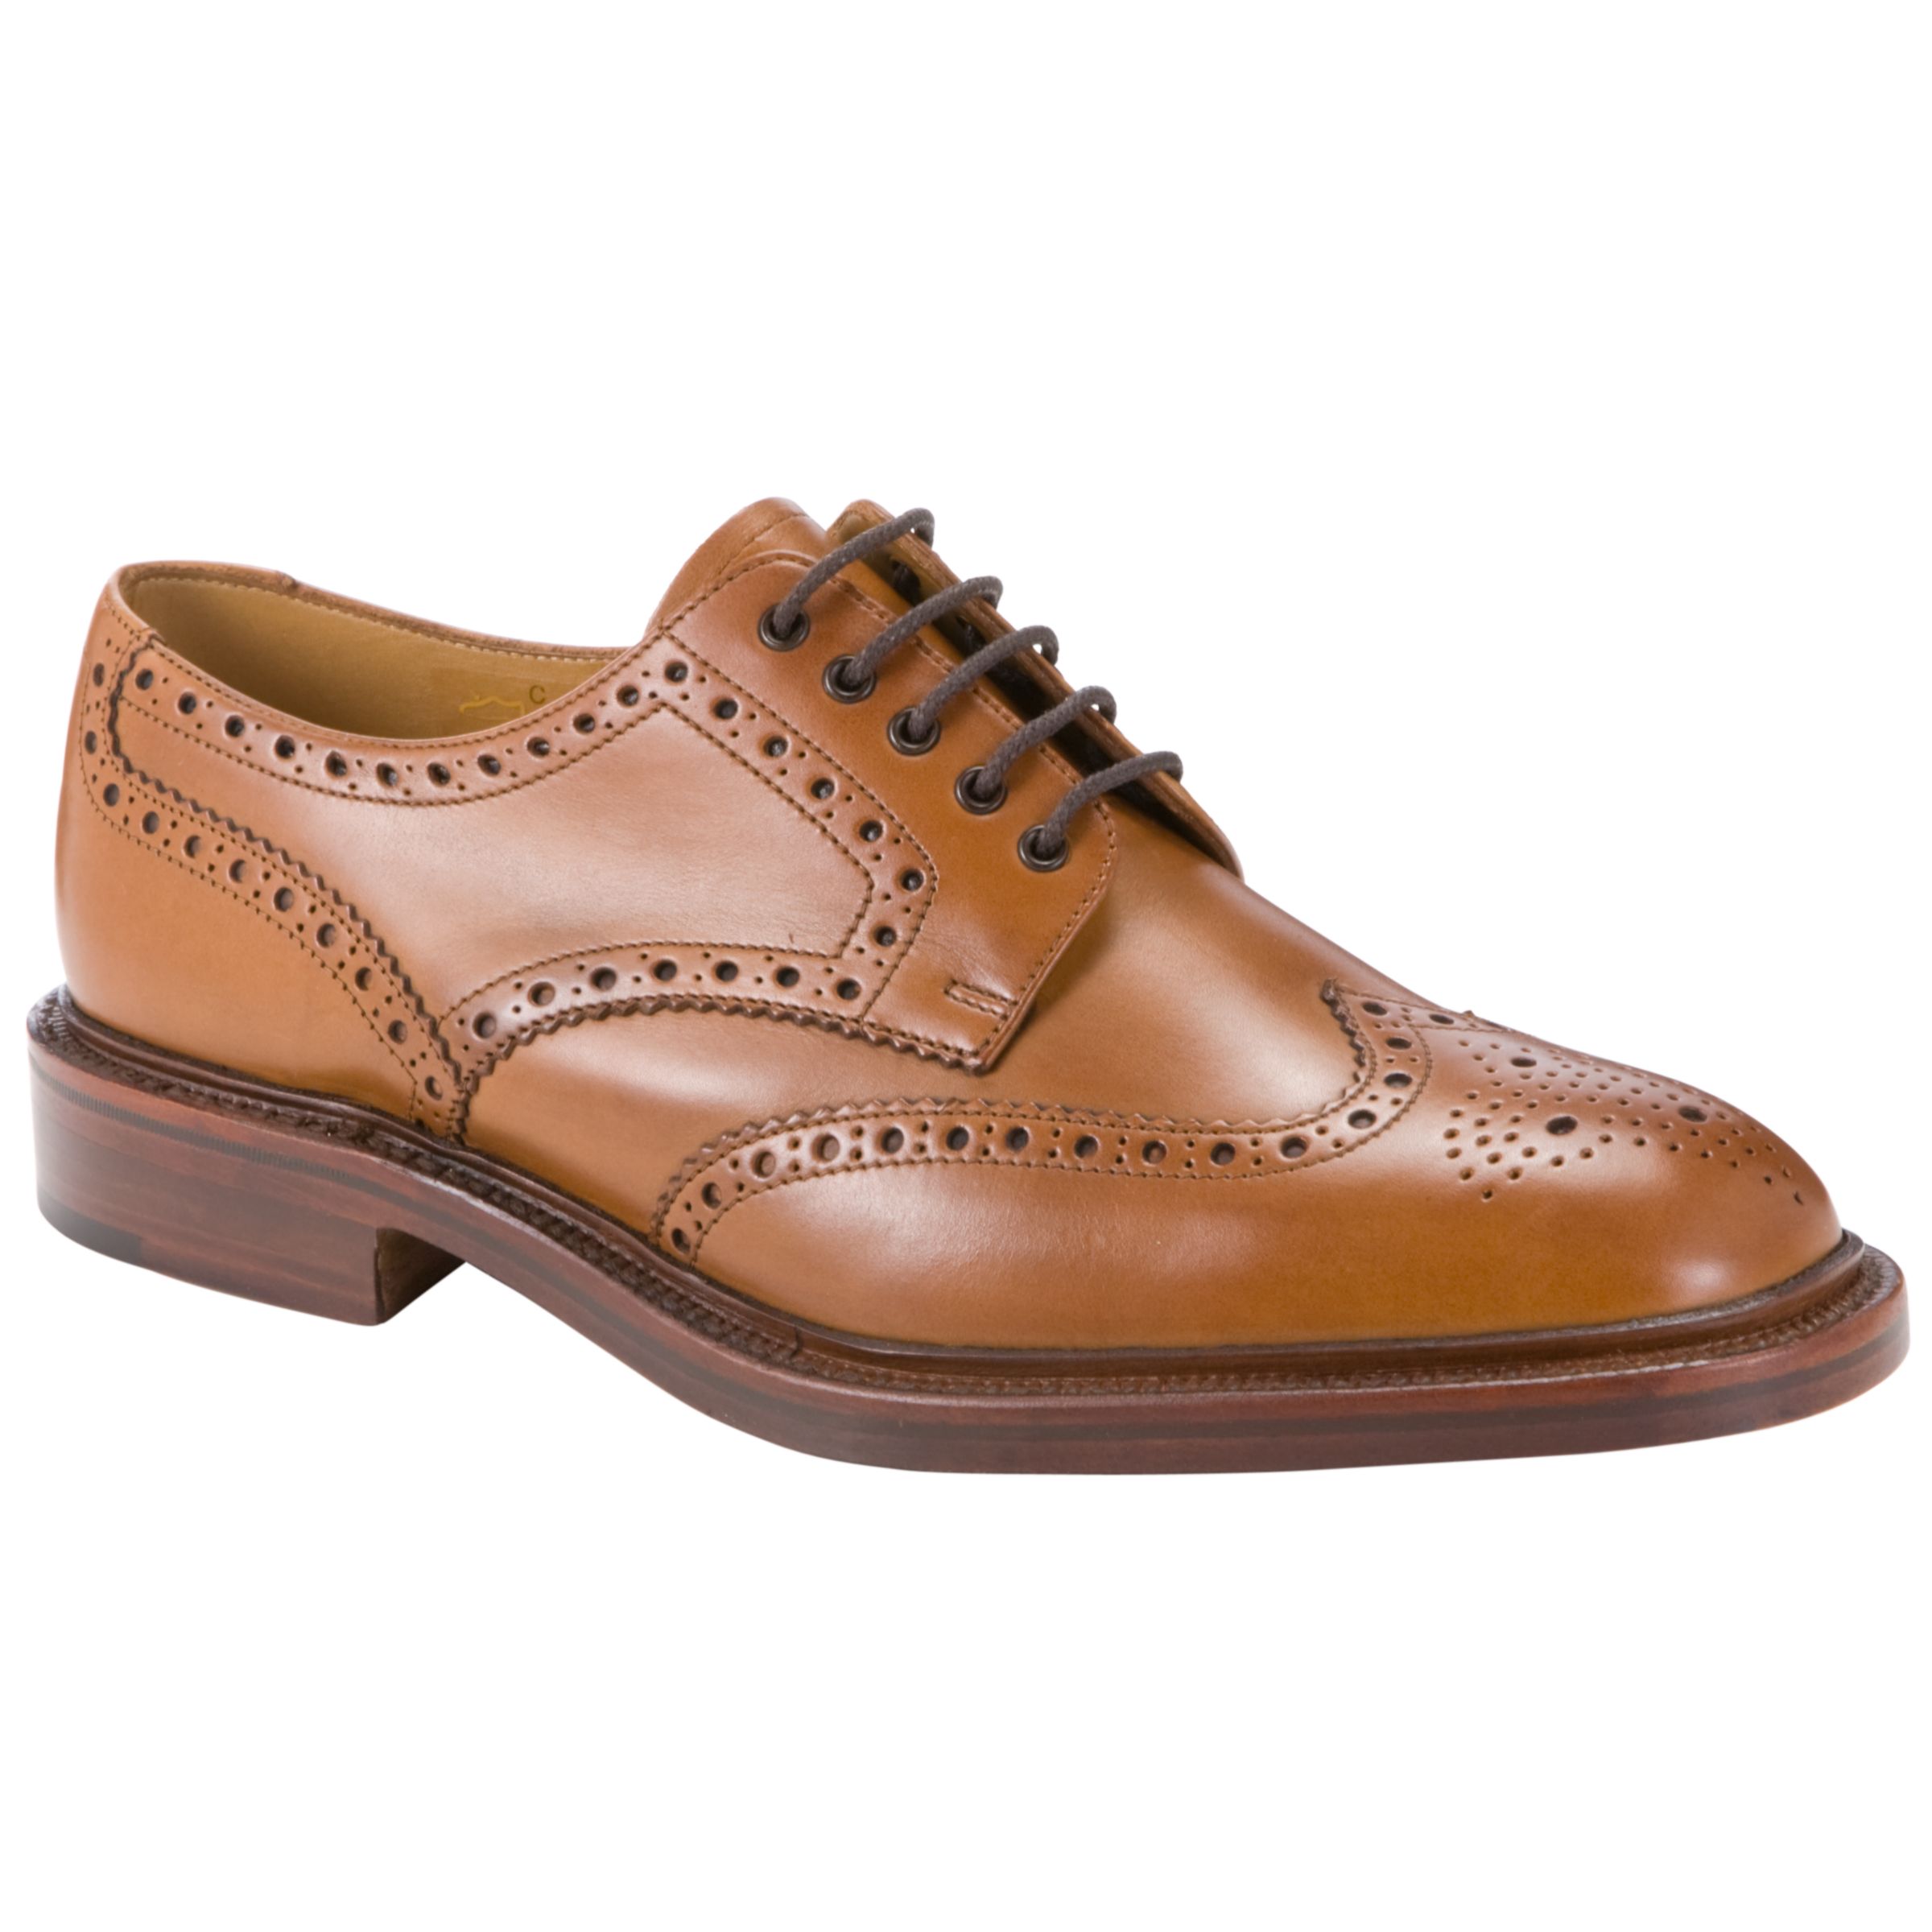 Loake Chester Leather Brogue Shoes, Tan at John Lewis